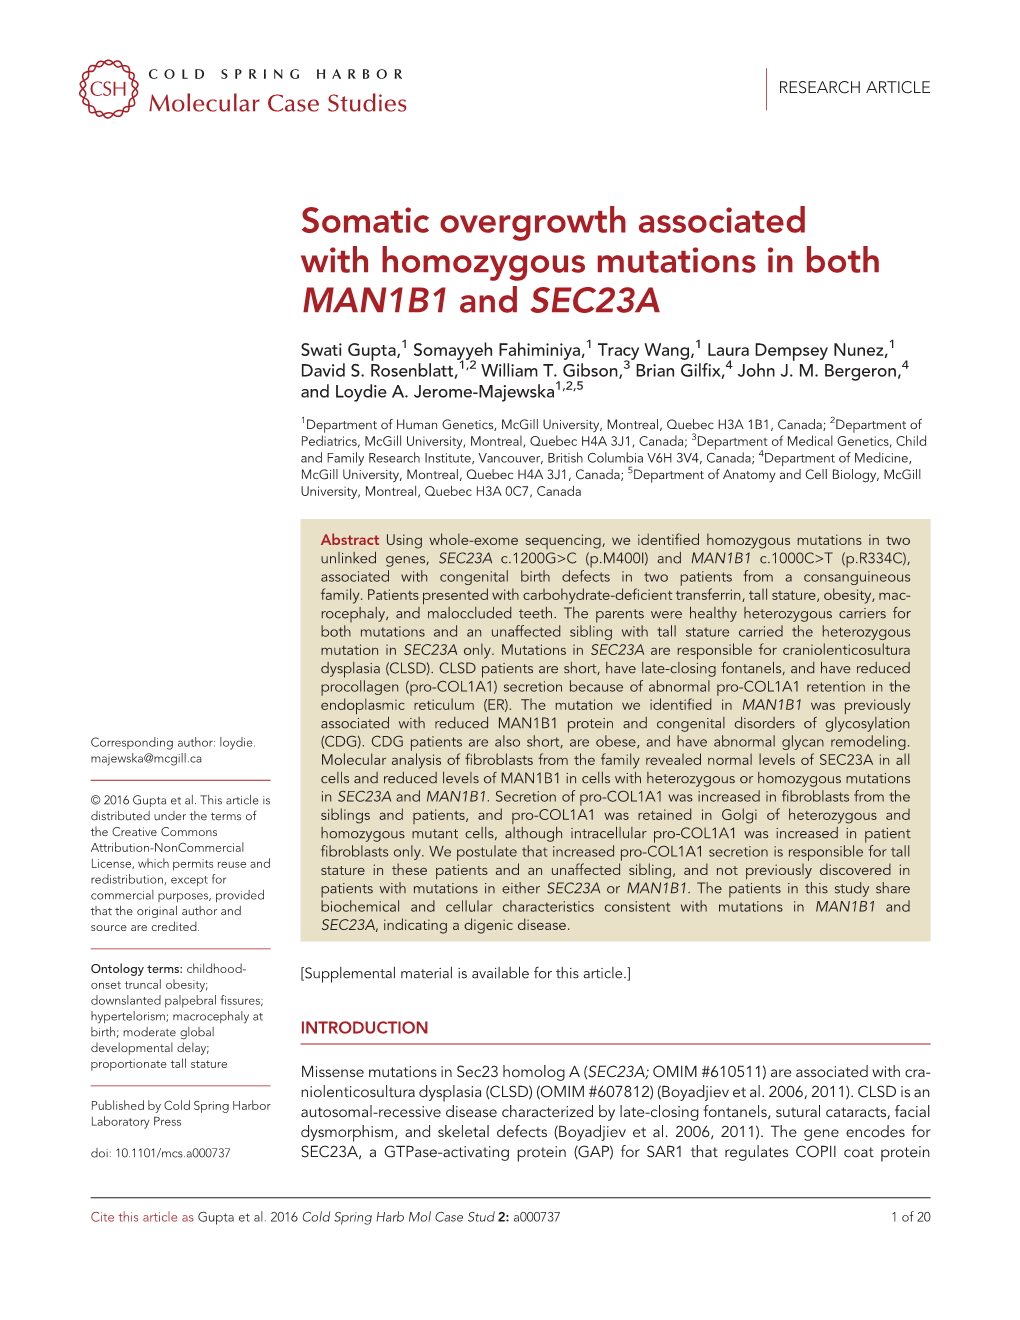 Somatic Overgrowth Associated with Homozygous Mutations in Both MAN1B1 and SEC23A